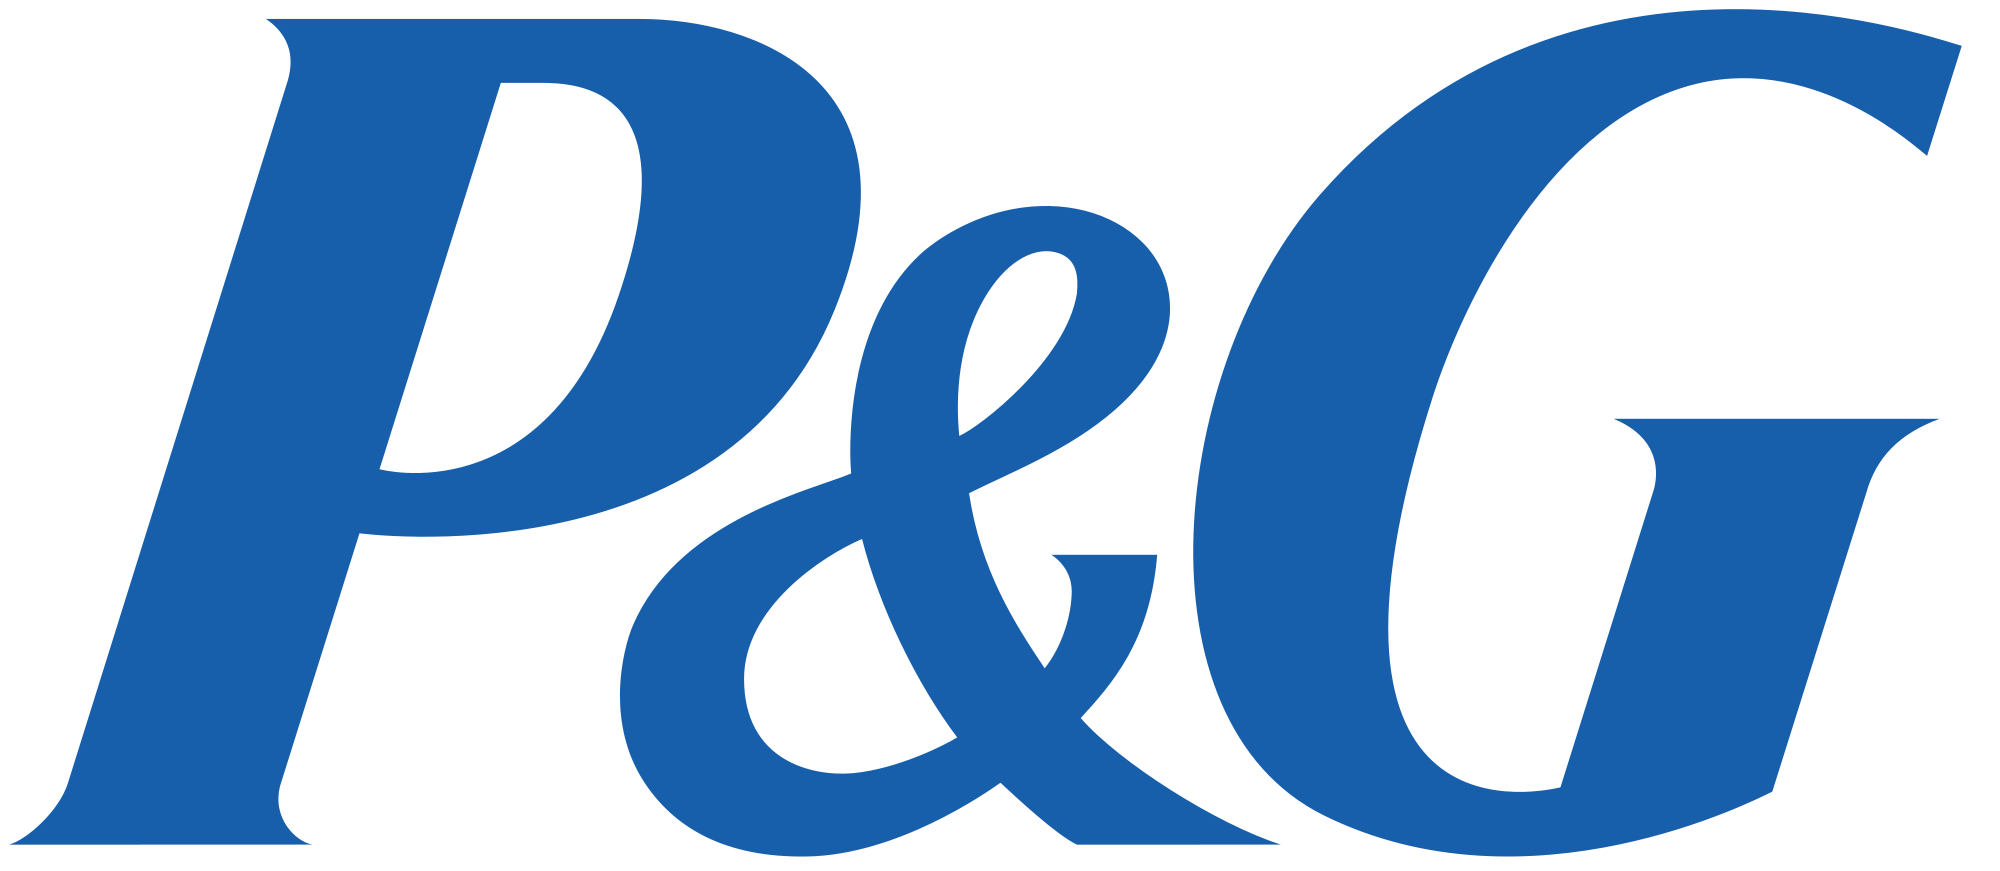 PROCTER-AND-GAMBLE